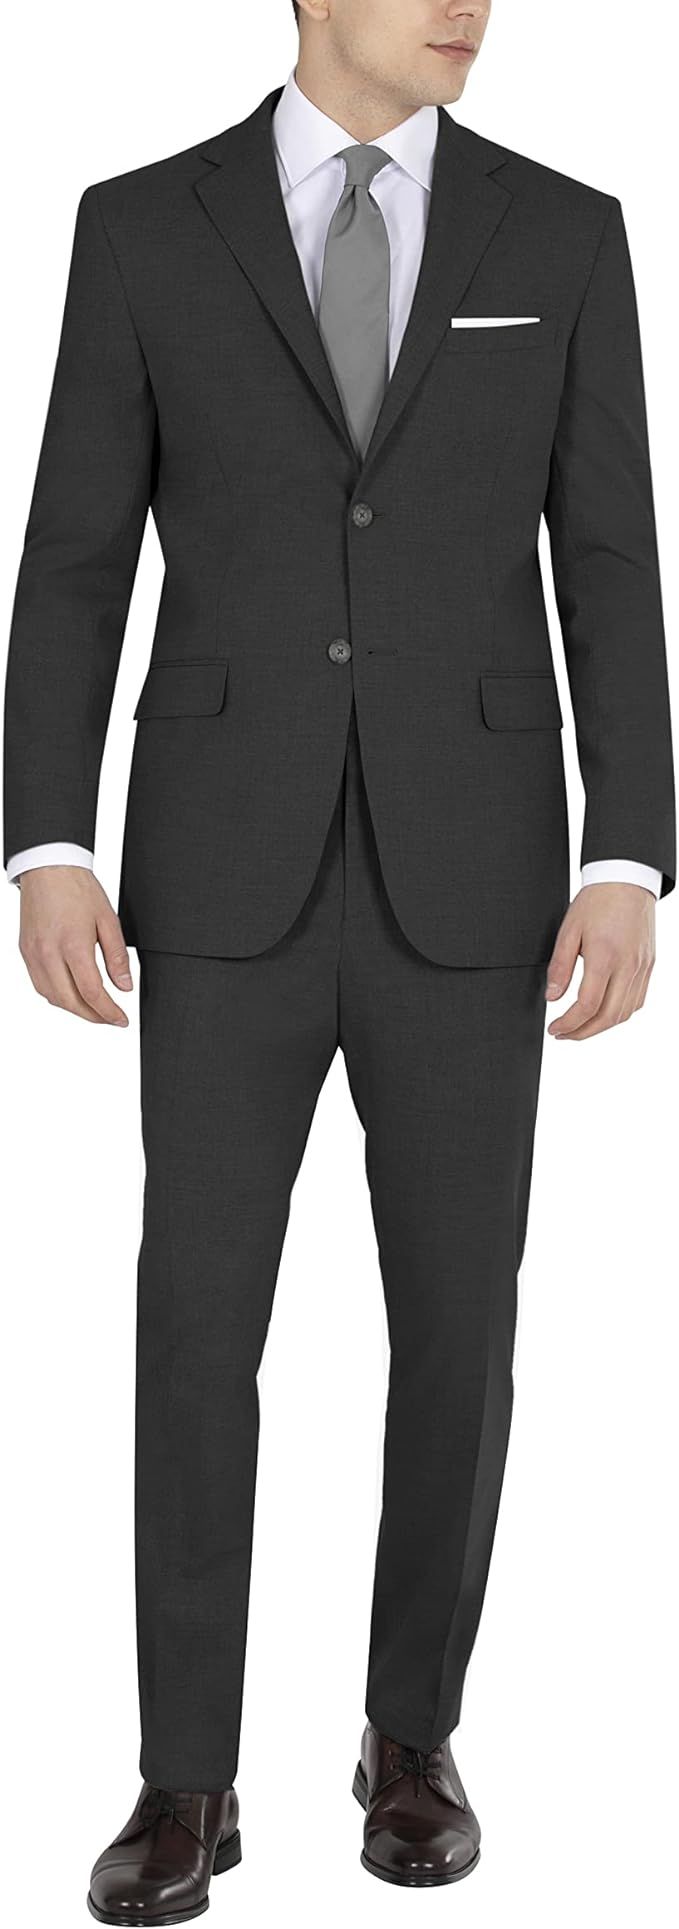 DKNY Men's Modern Fit High Performance Suit Separates | Amazon (US)